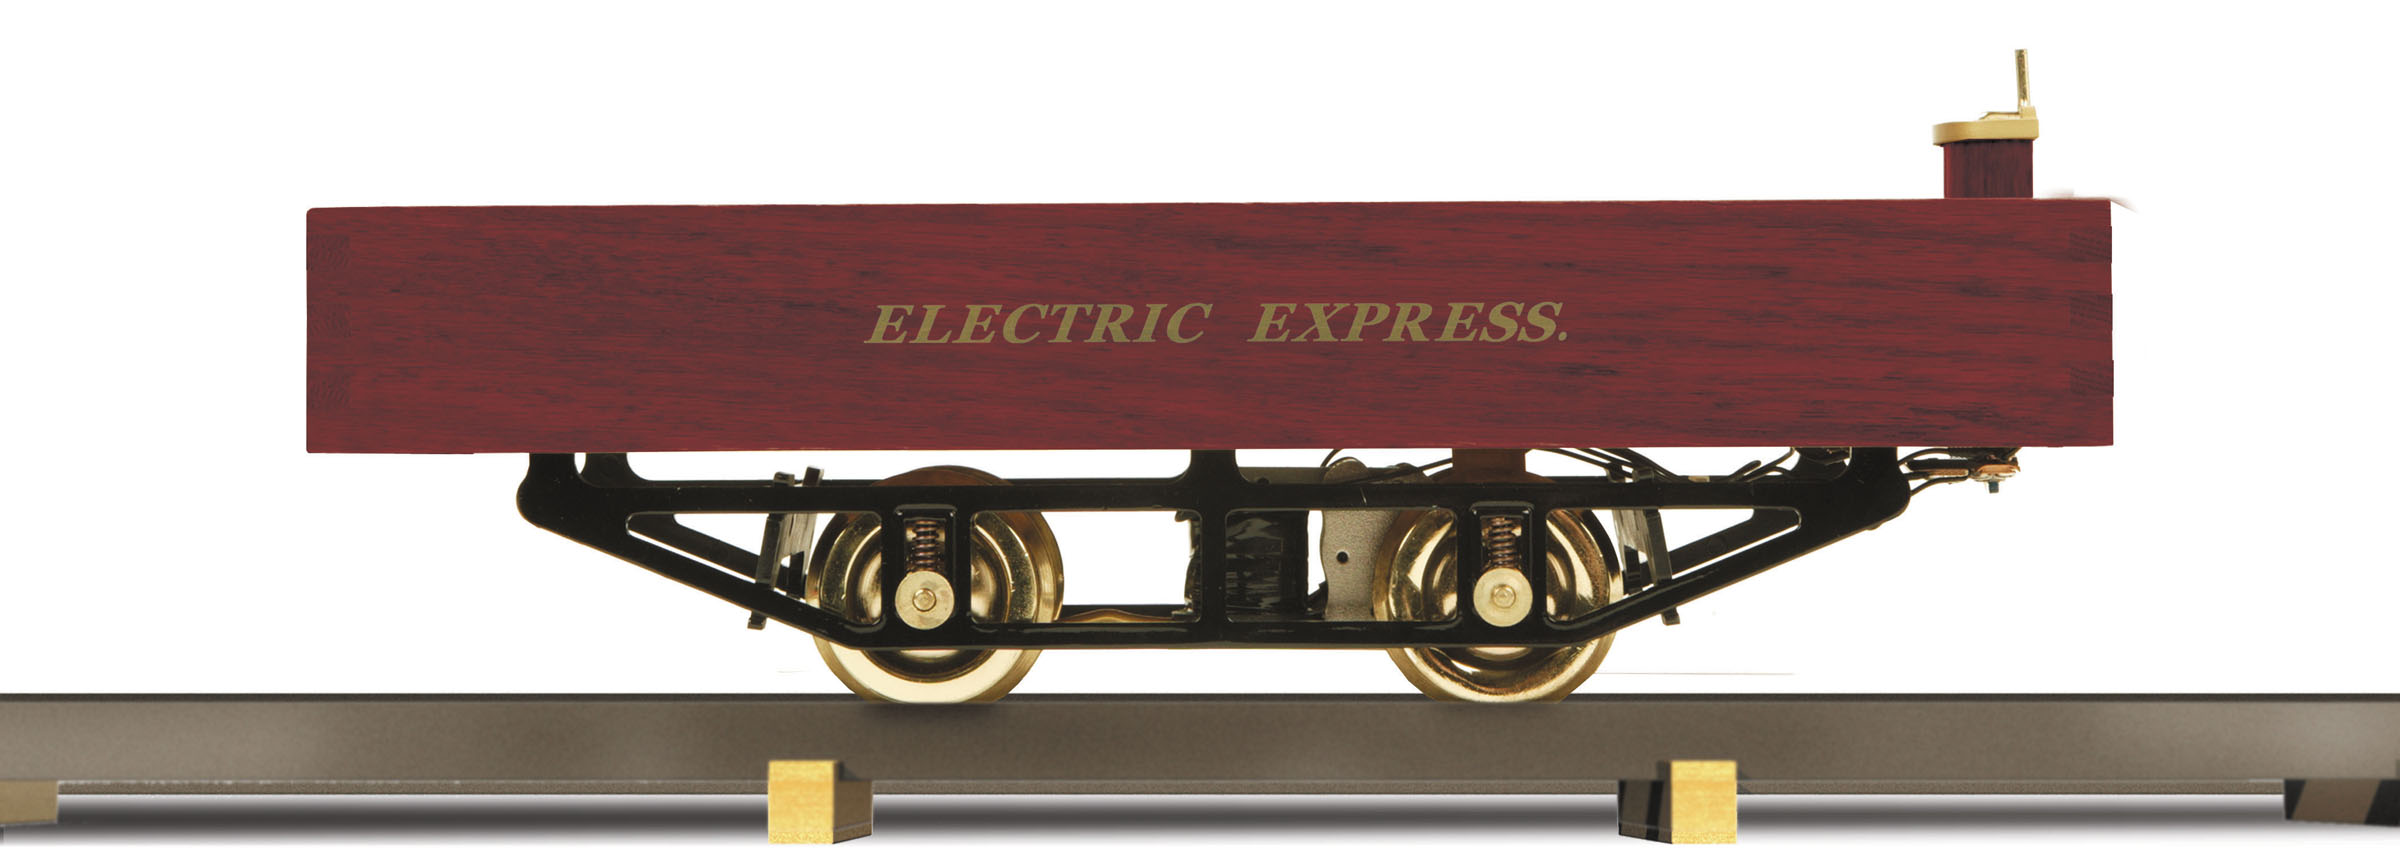 11-2012-0 | MTH ELECTRIC TRAINS